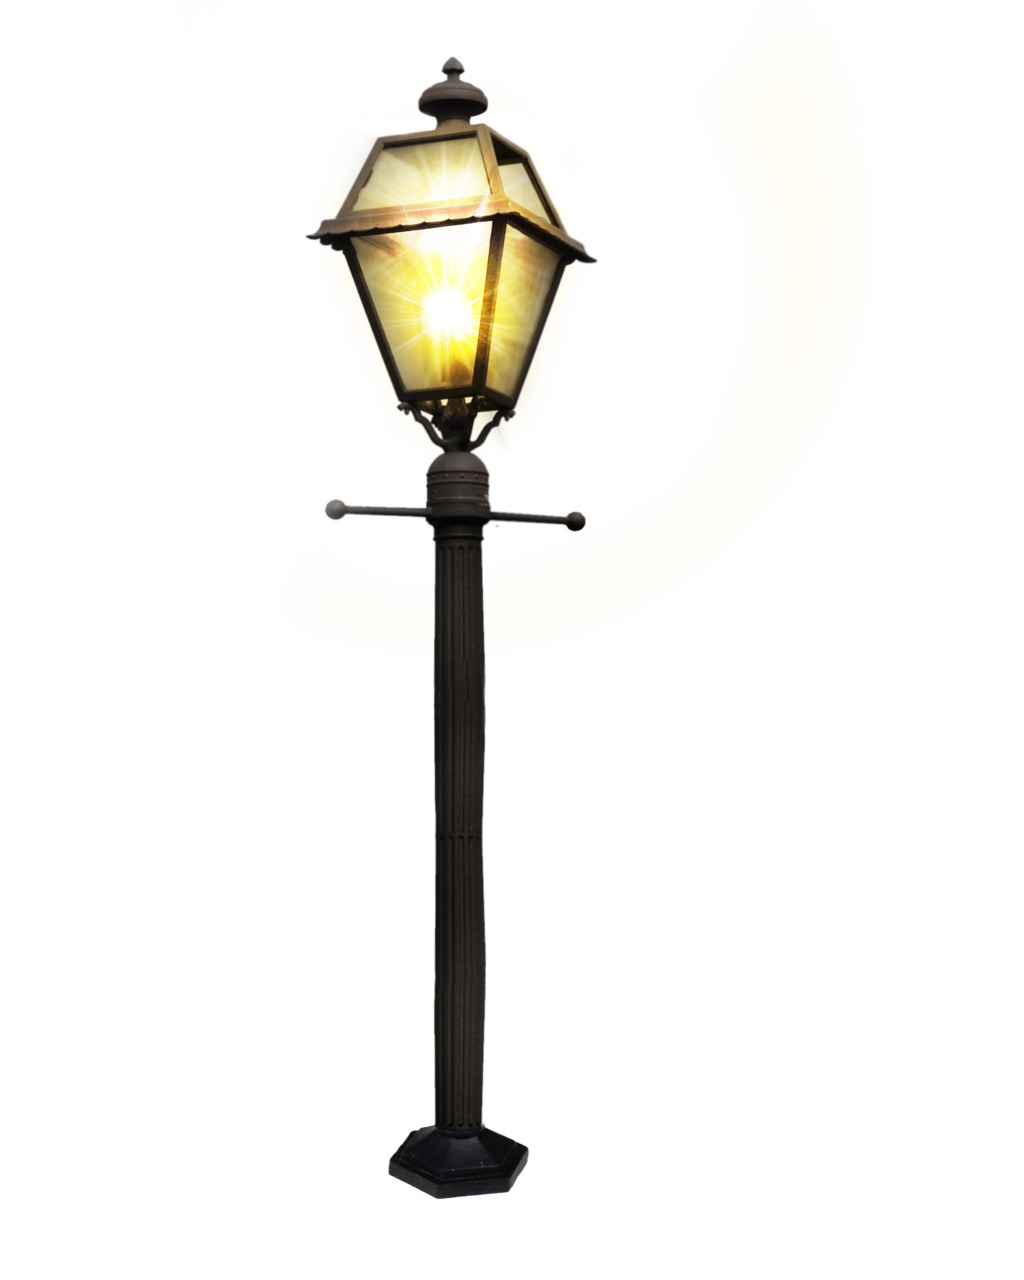 Lamp PNG Transparent Images | PNG All